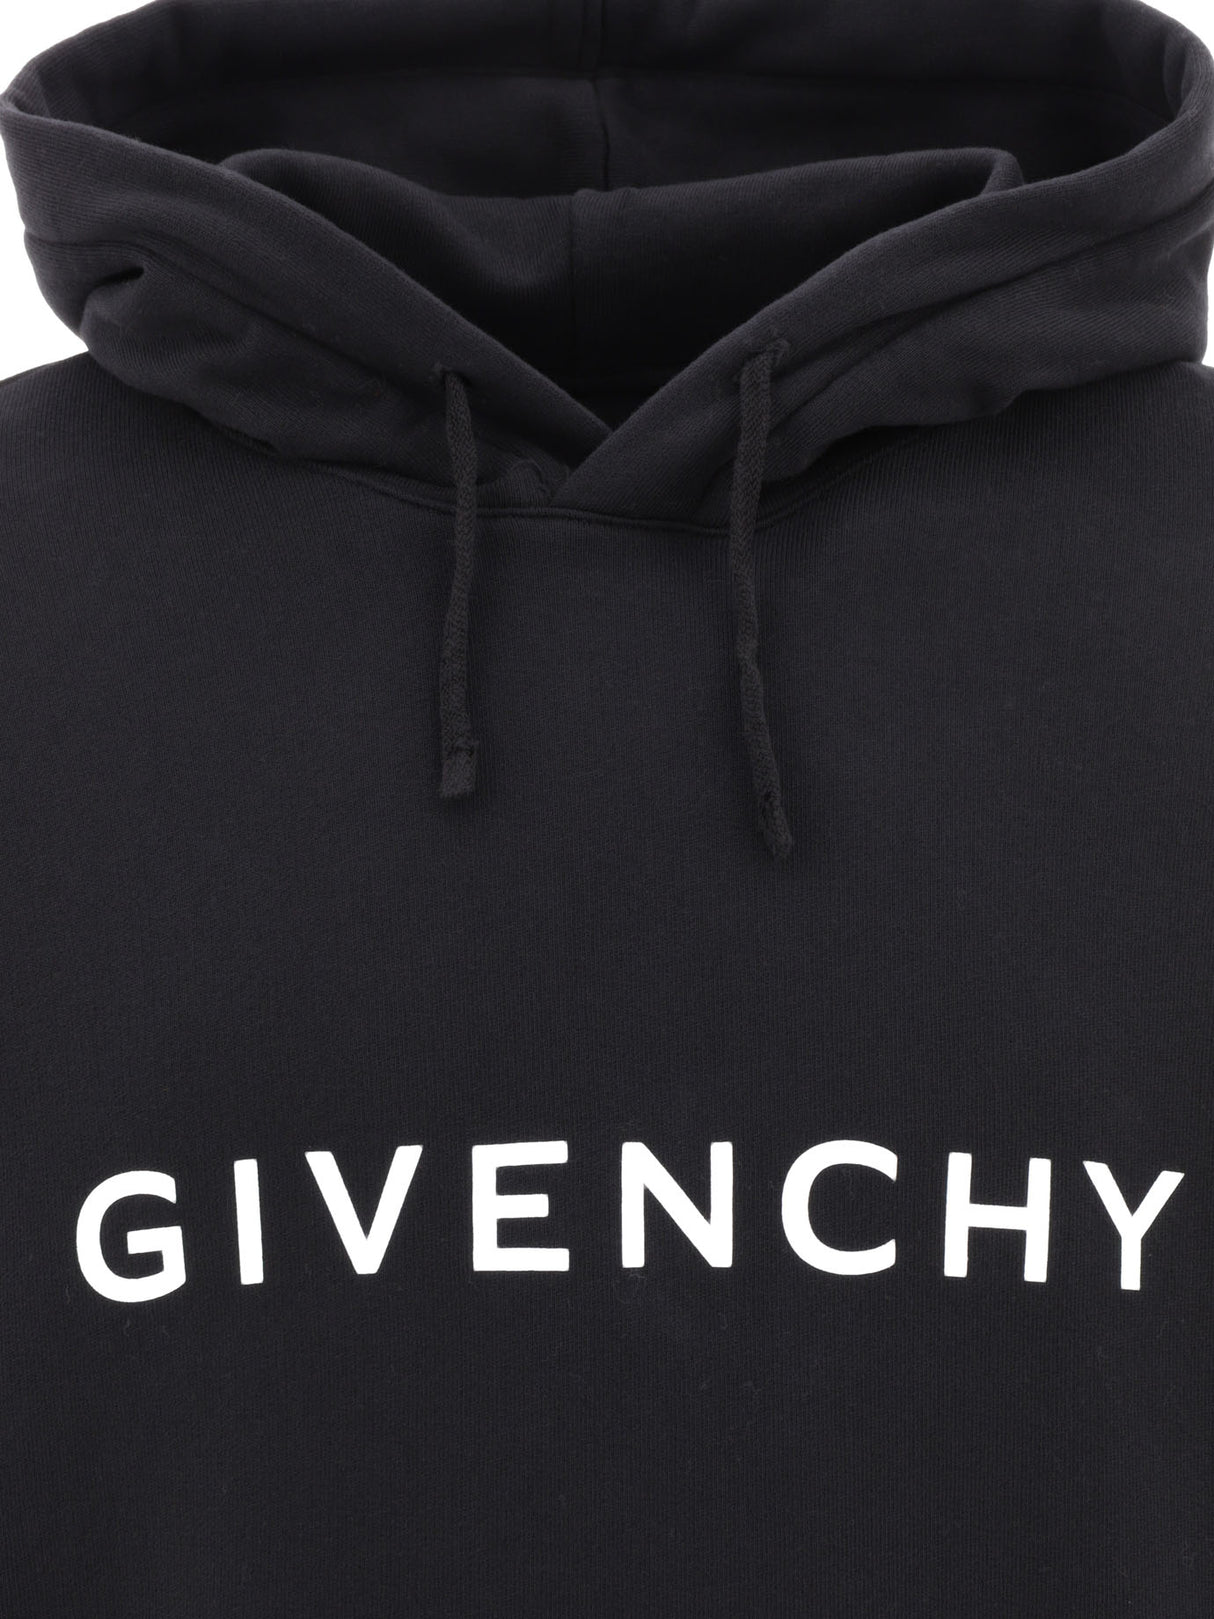 GIVENCHY Modern Black Hoodie for Men